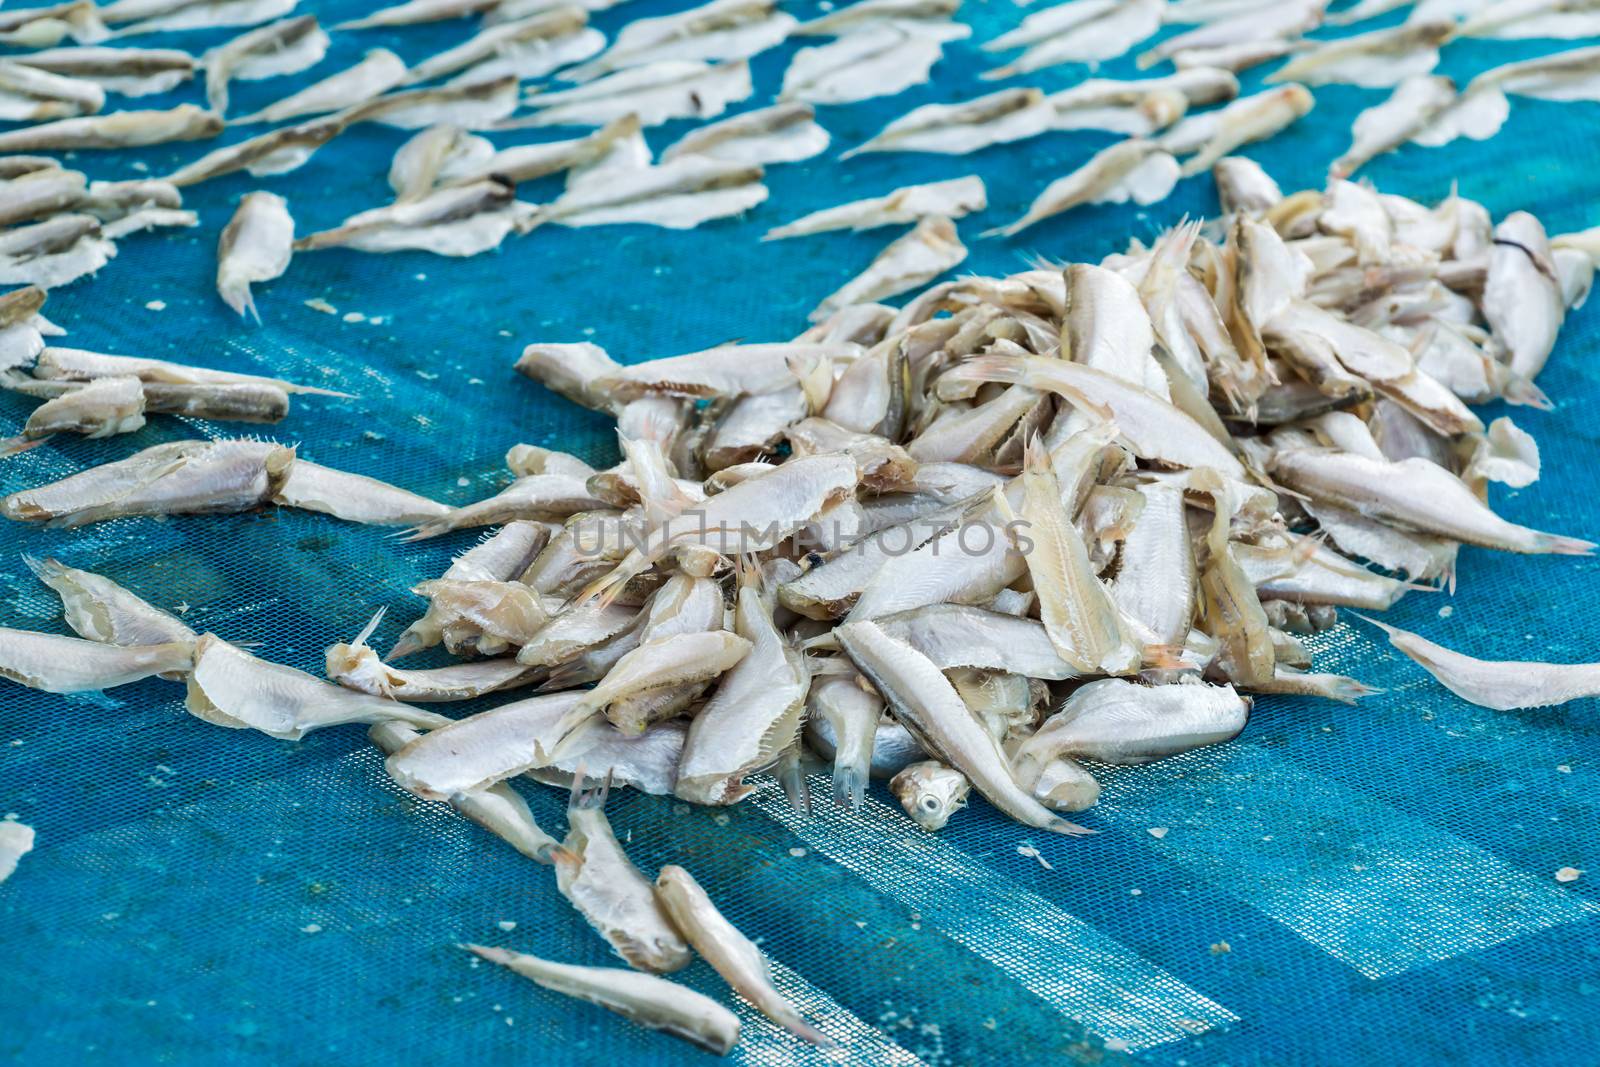 fish processing by drying allows for long-term storage